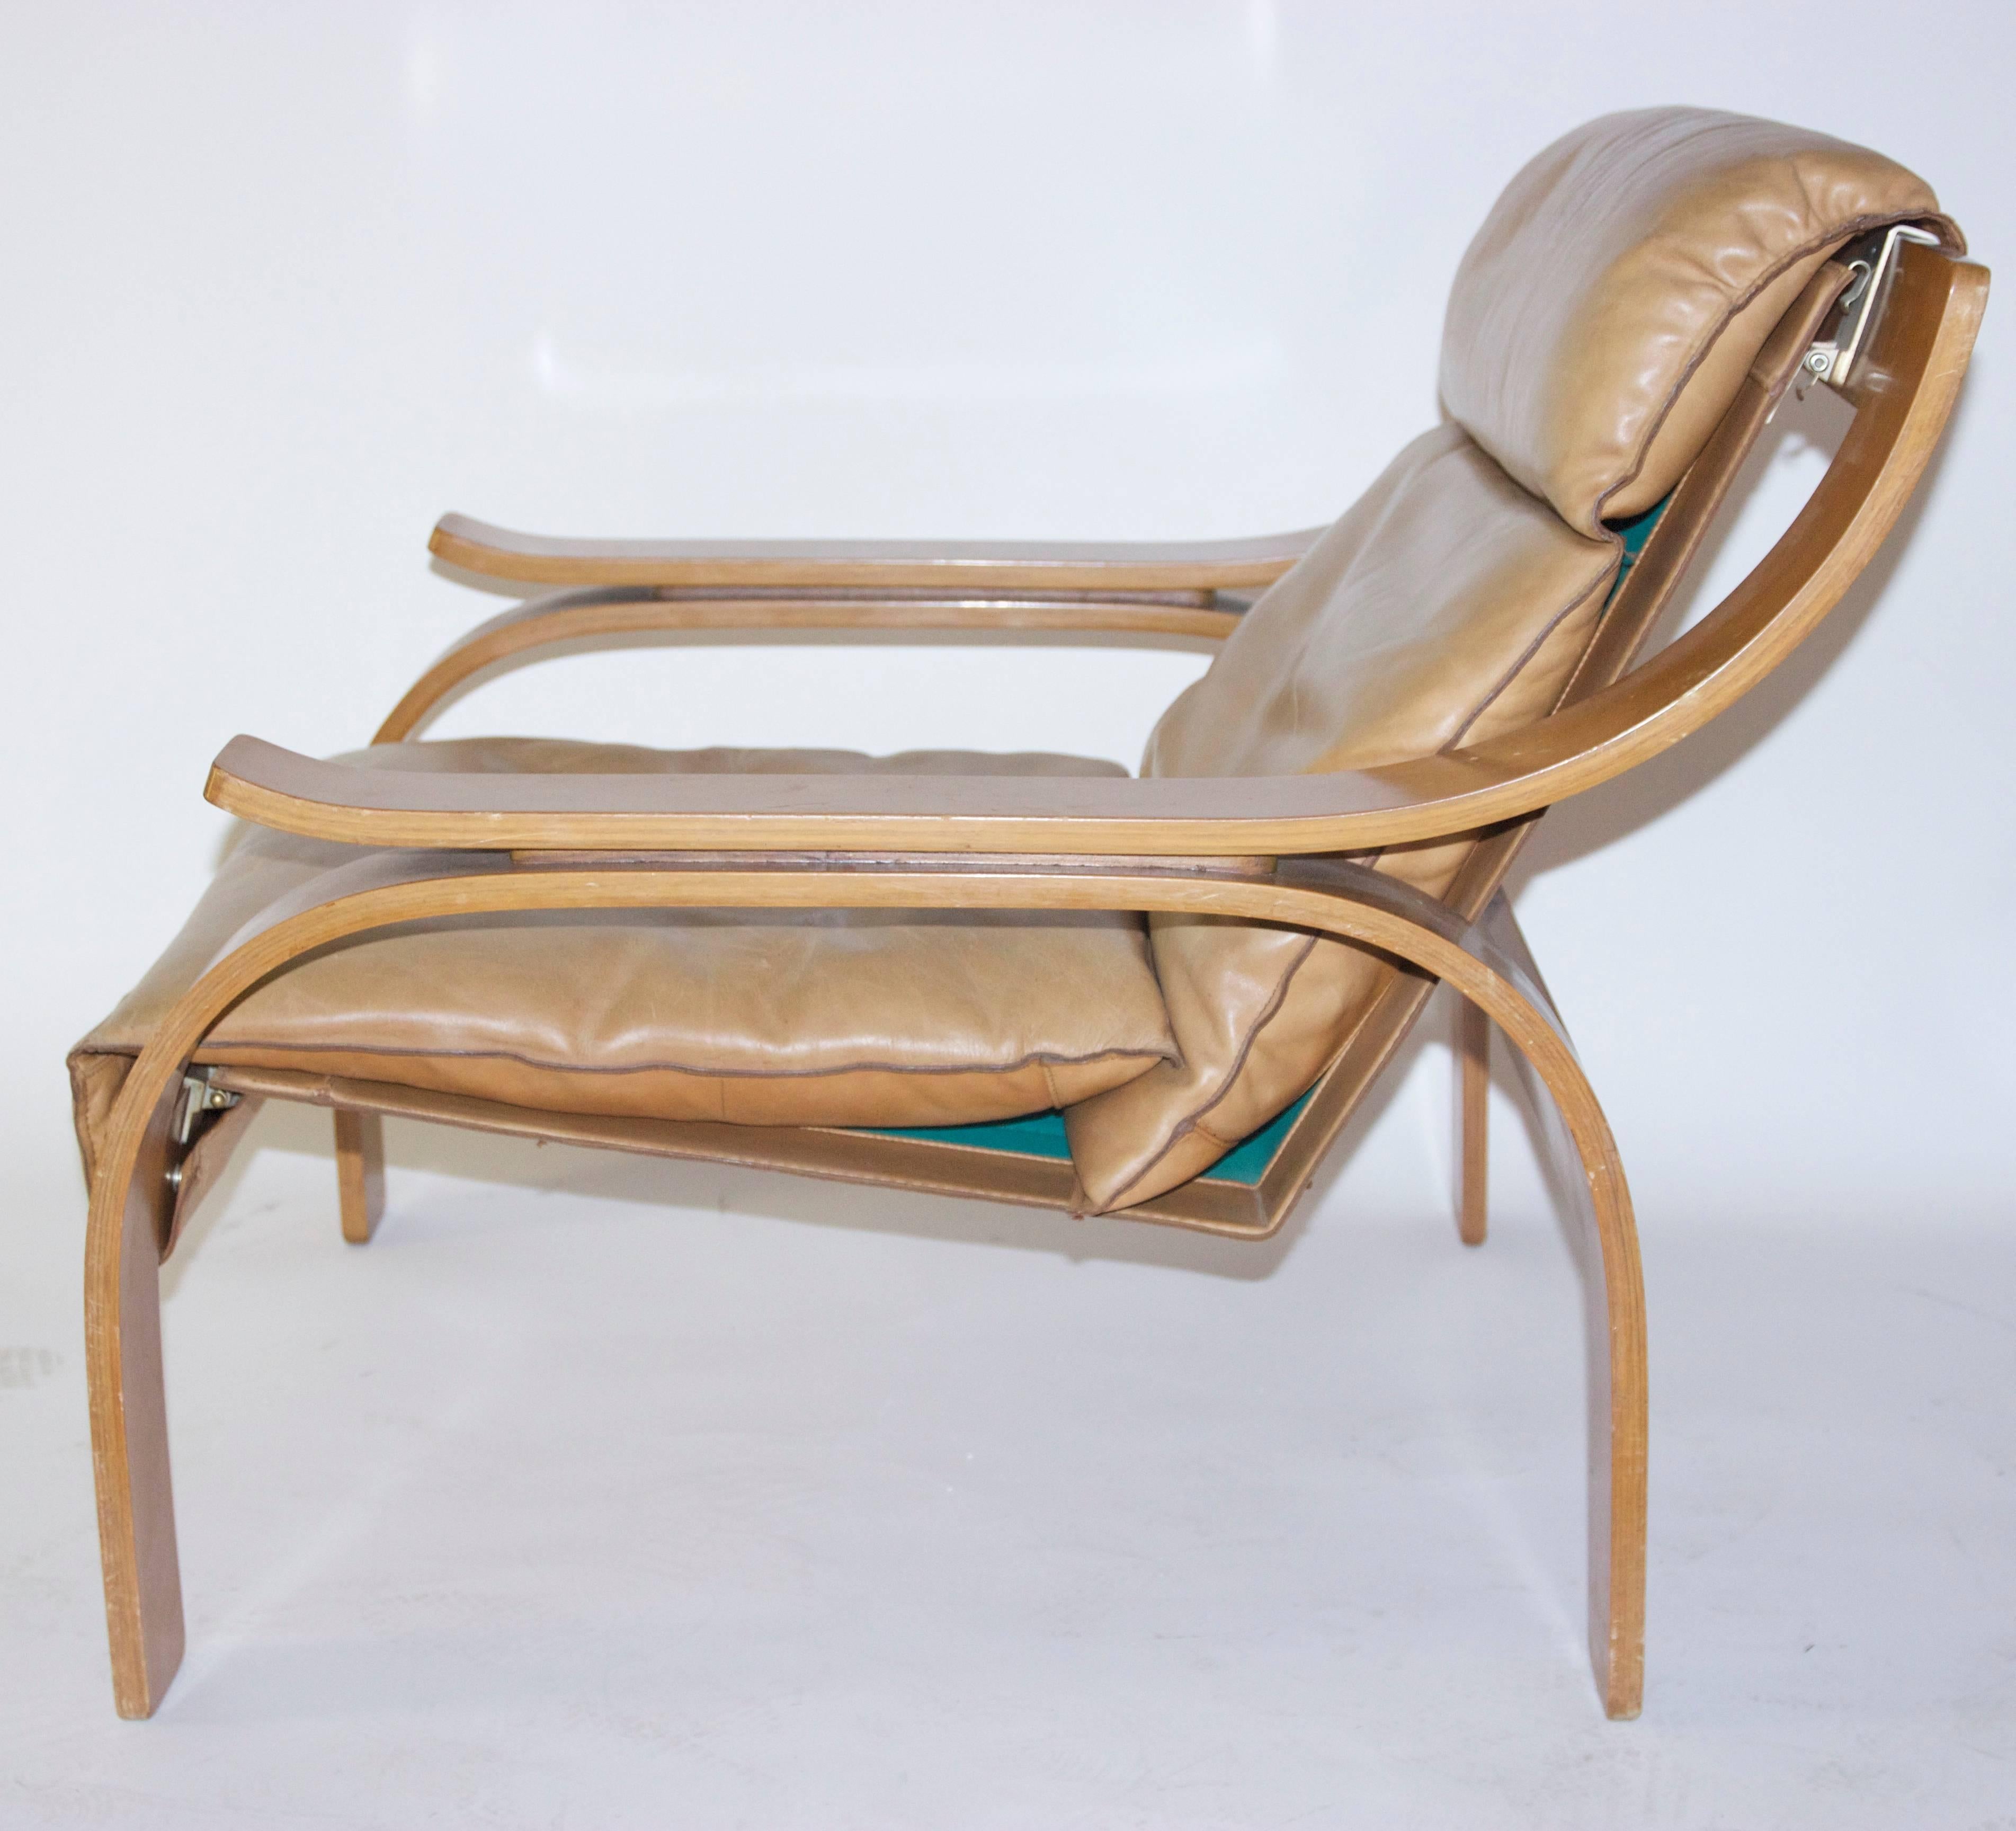 Marco Zanuso, 722 woodline armchair,
original wood and leather,
Cassina edition,
circa 1970, France.
Measures: Height 70 cm, sitting height 40 cm, width 75 cm, depth 85 cm.